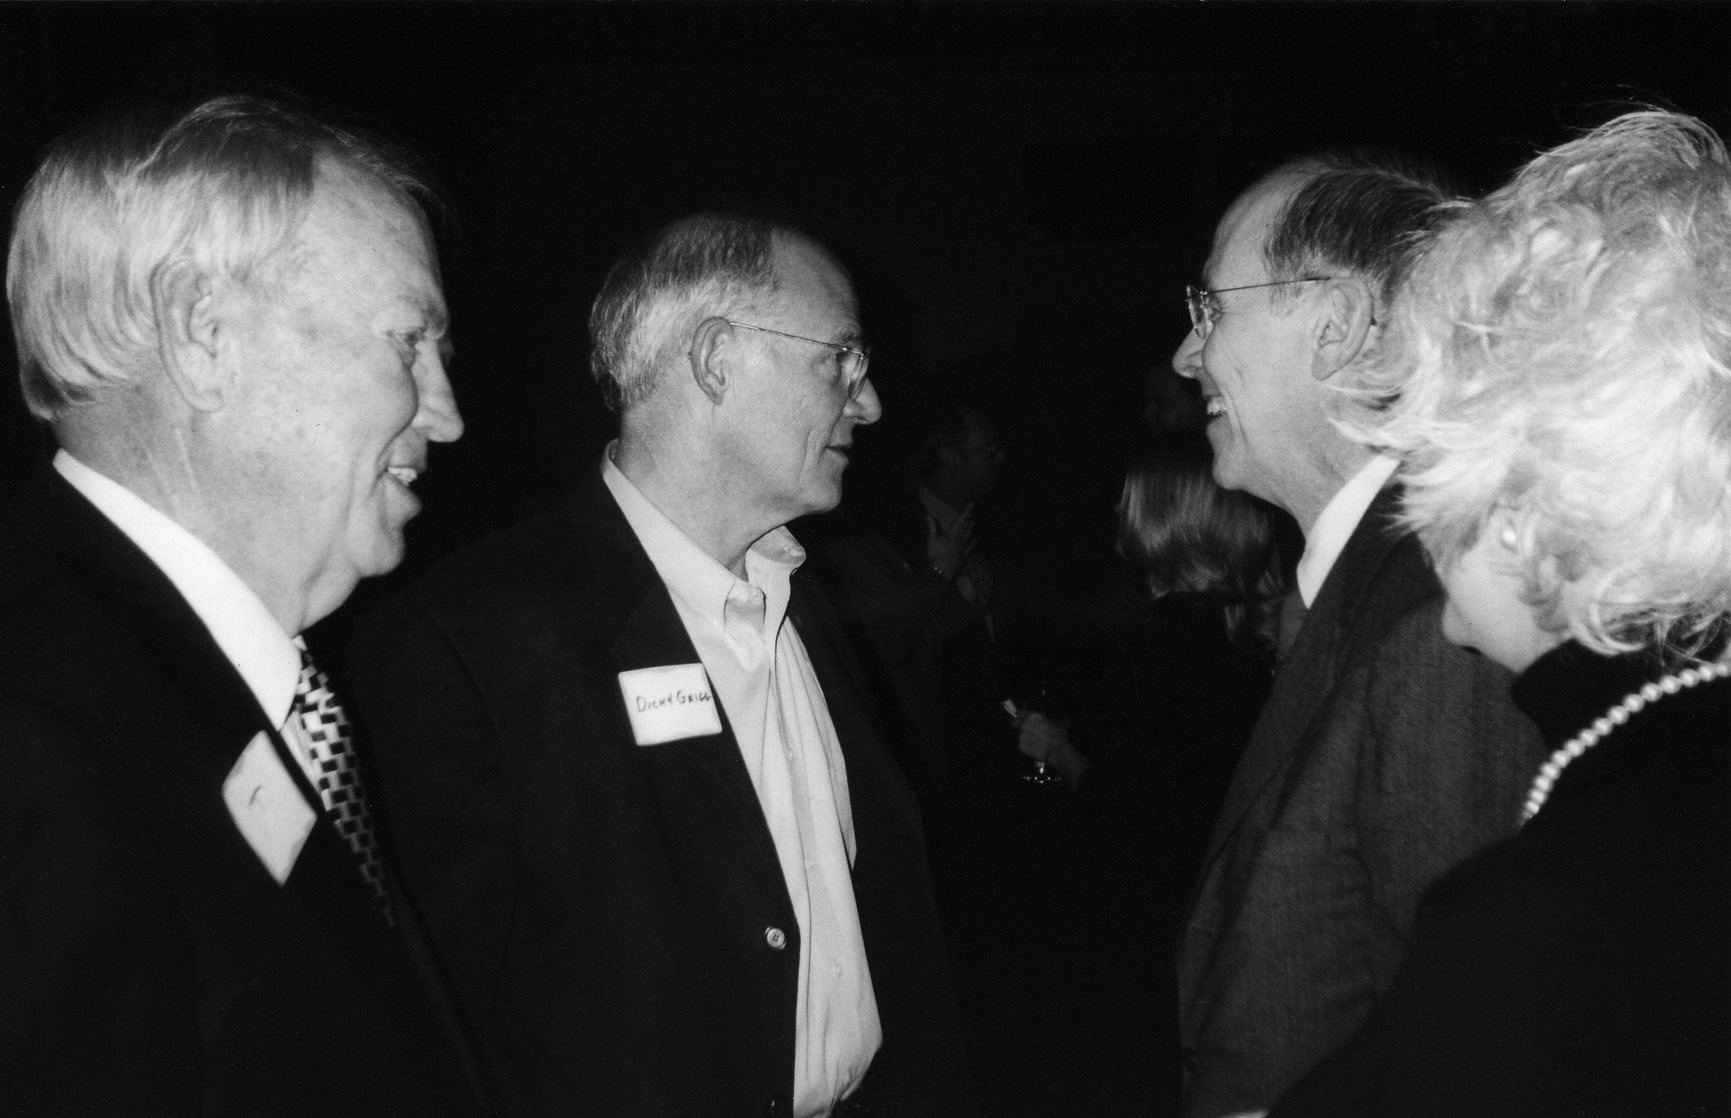 T Jones, Dicky Grigg, and Chancellor Kent Hance